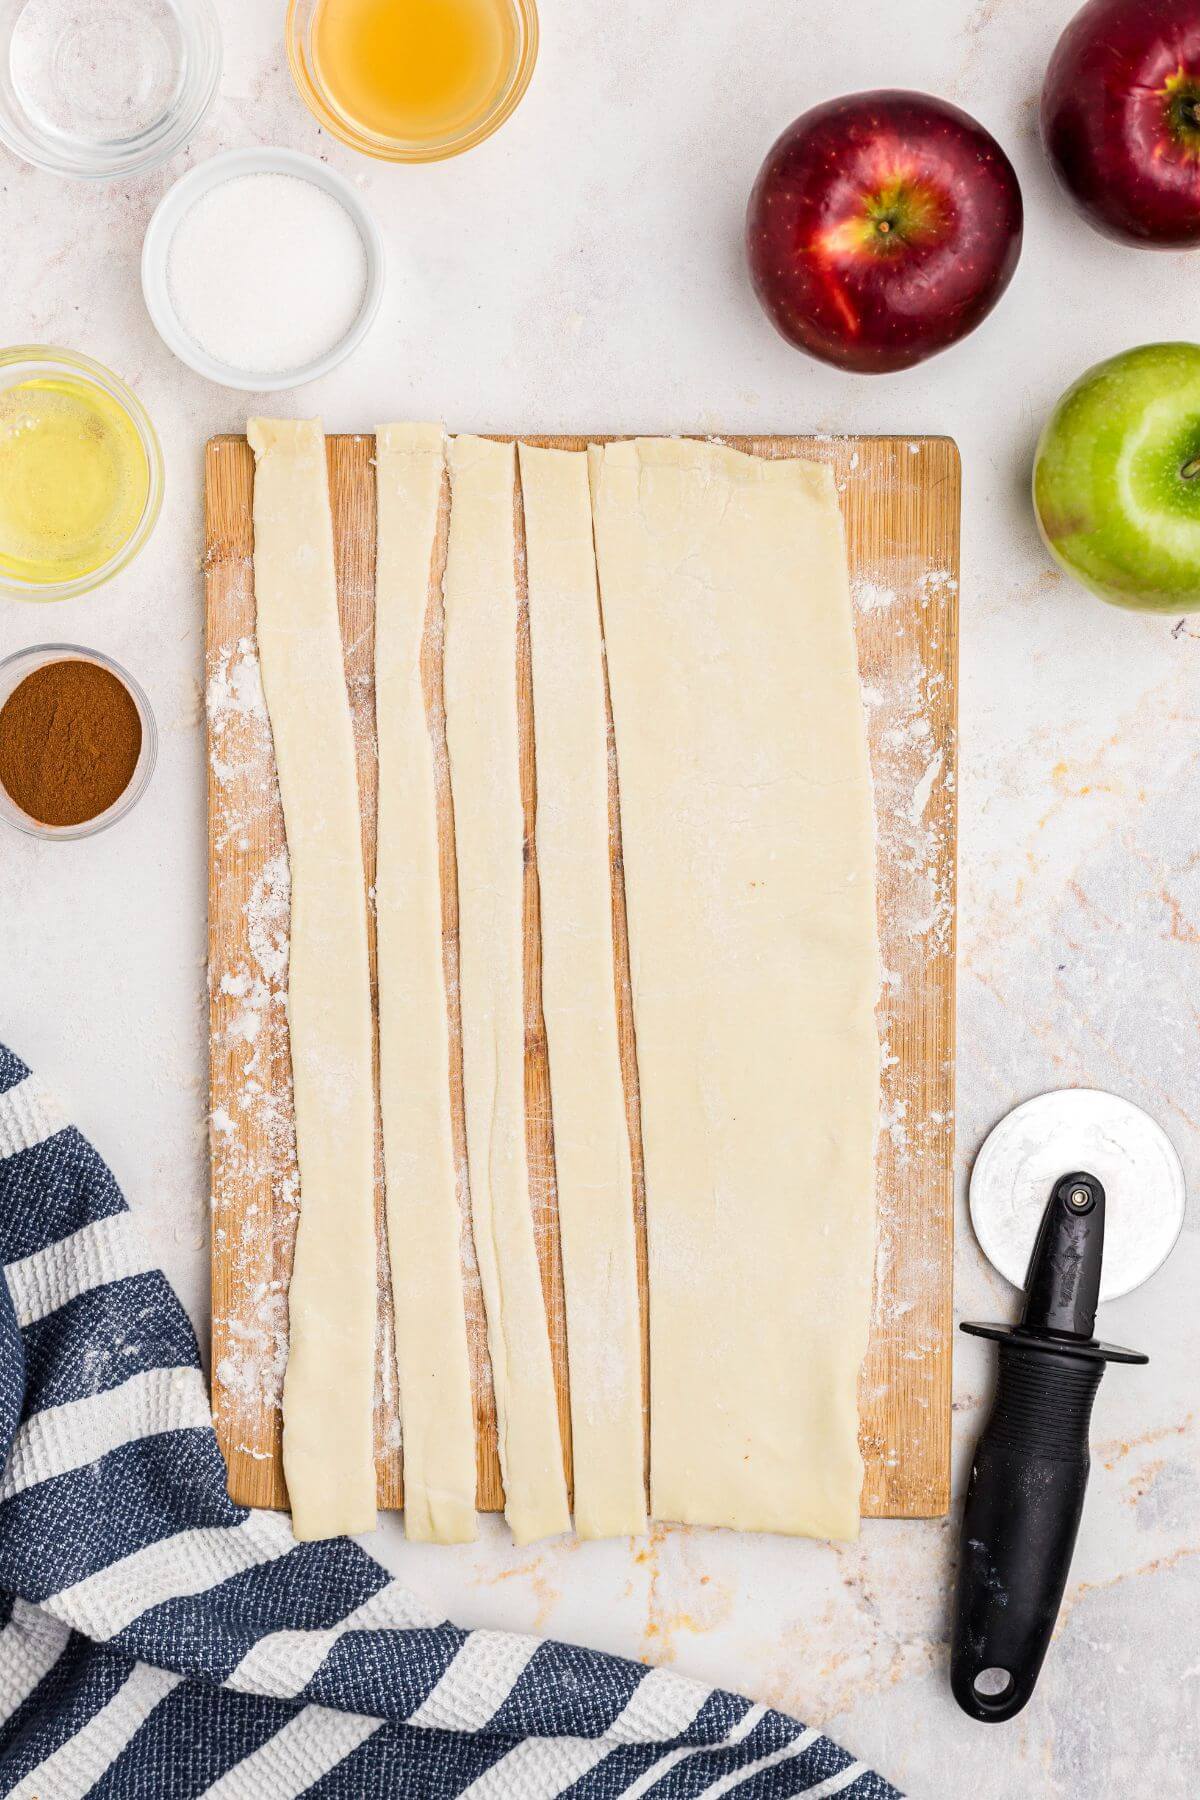 Puff pastry sheet rolled out and cut into slices on a wooden cutting board. 